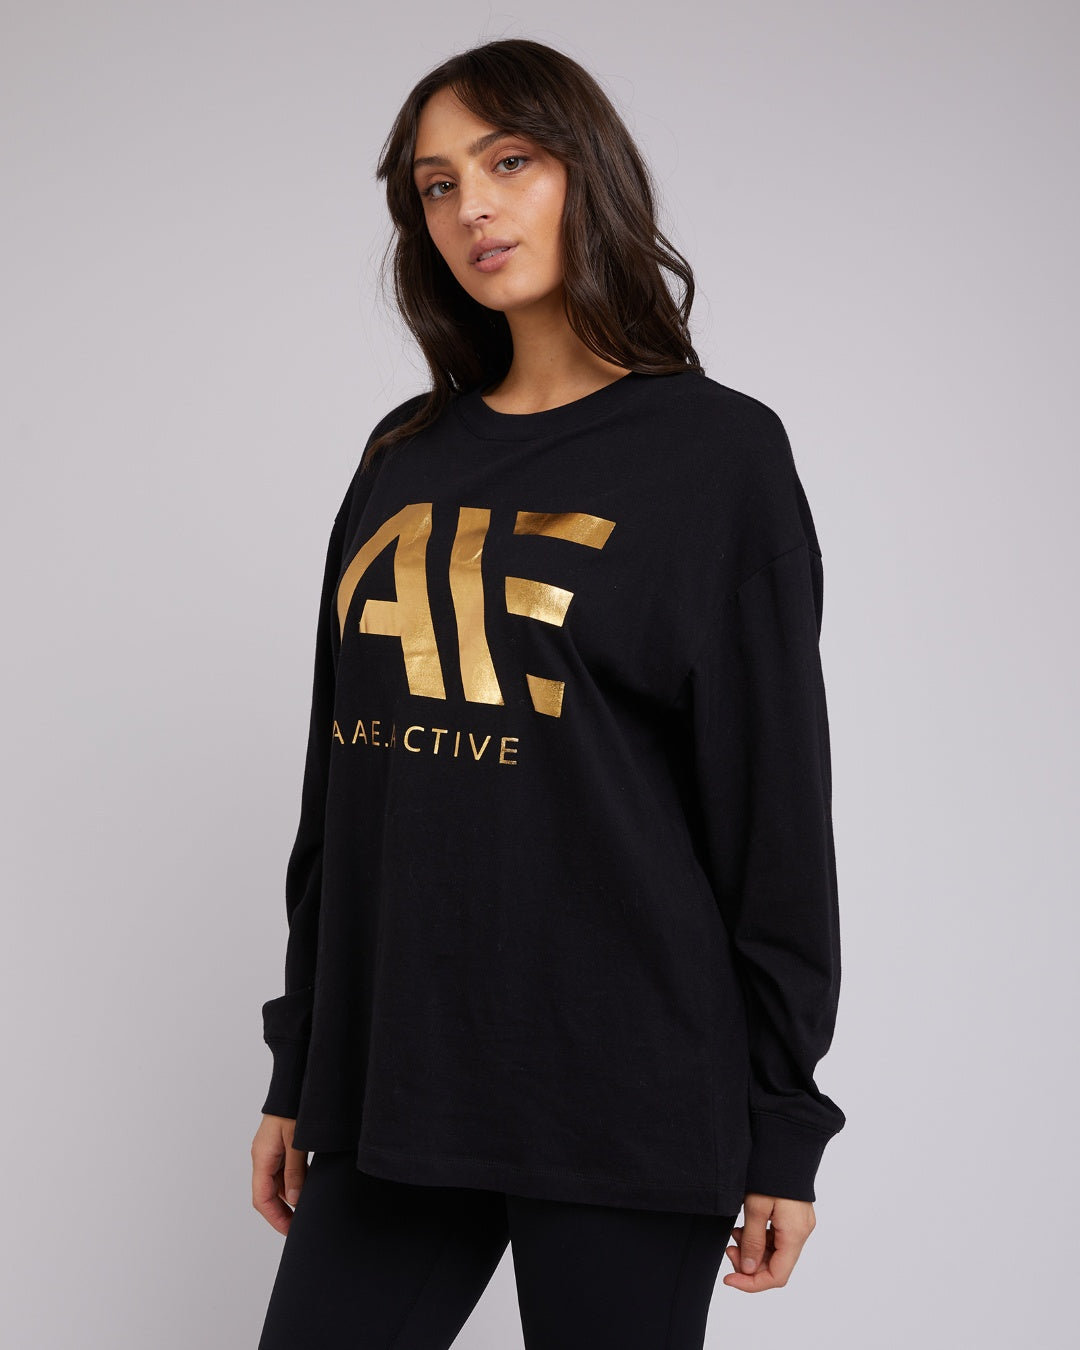 base tee from all about eve